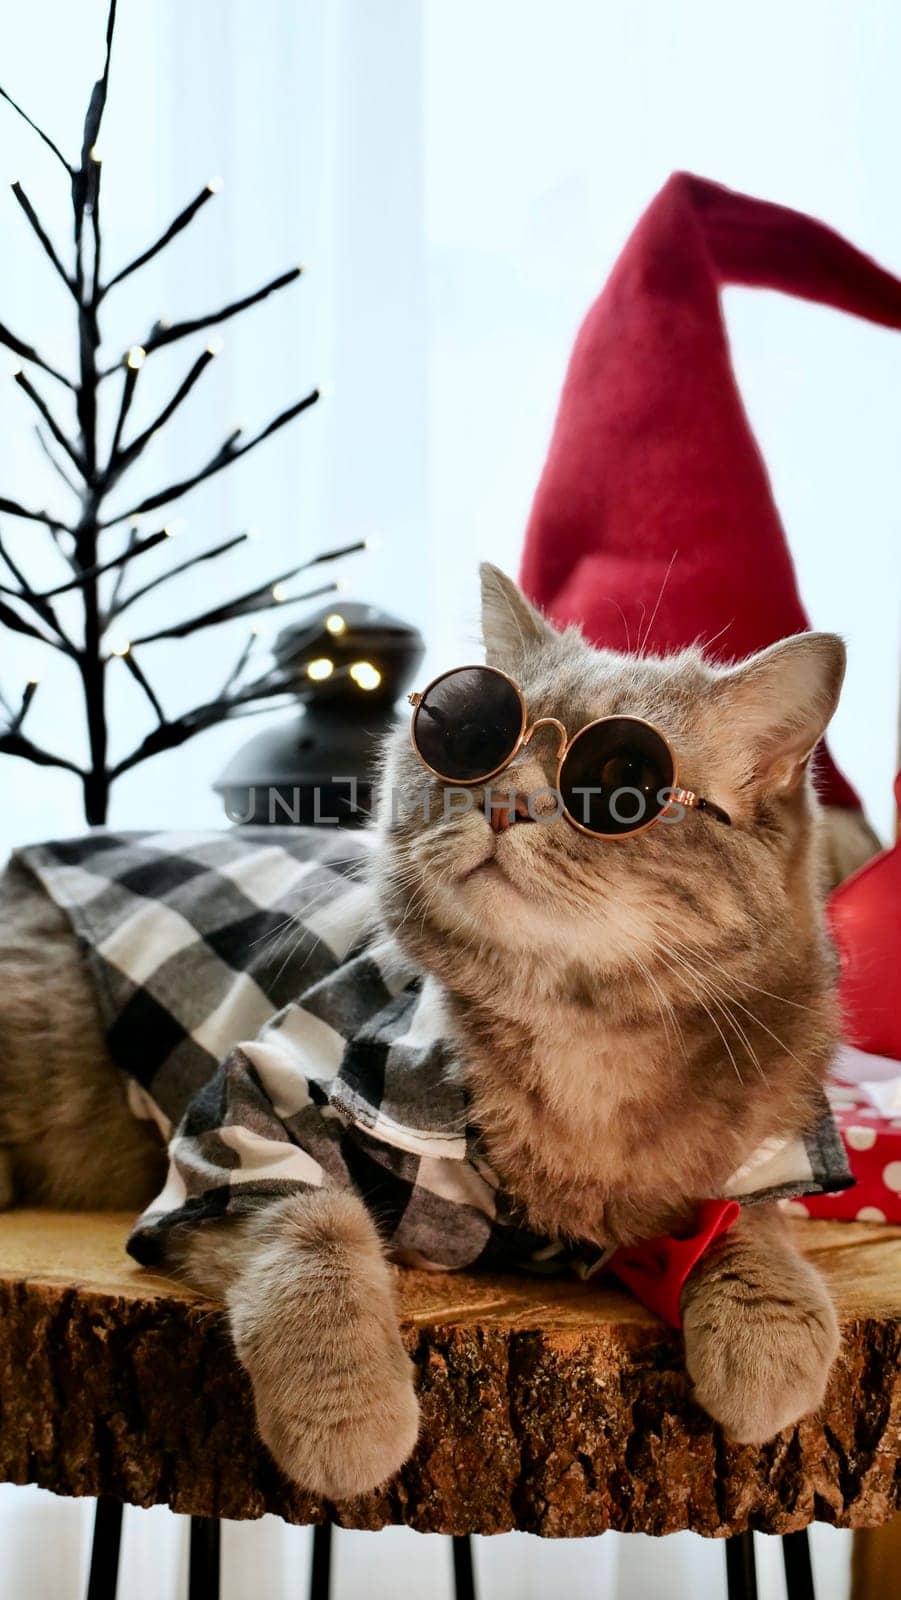 Scottish straight eared cat with glasses and red decorations on Happy New Year, celebrating Holiday Merry Christmas. Pet sitting on the table at home